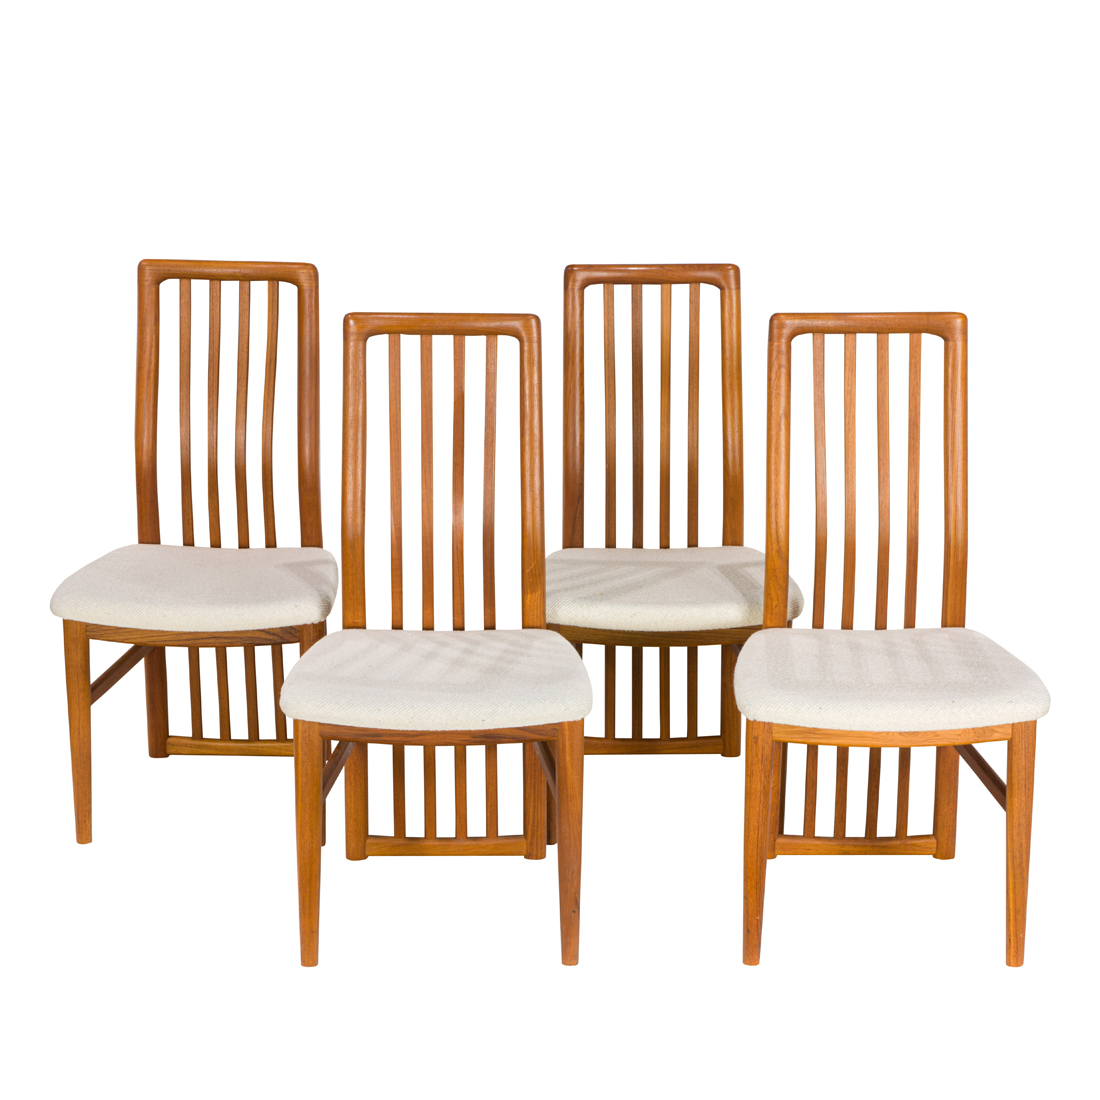  LOT OF 4 DANISH TEAK DINING CHAIRS 3a197d